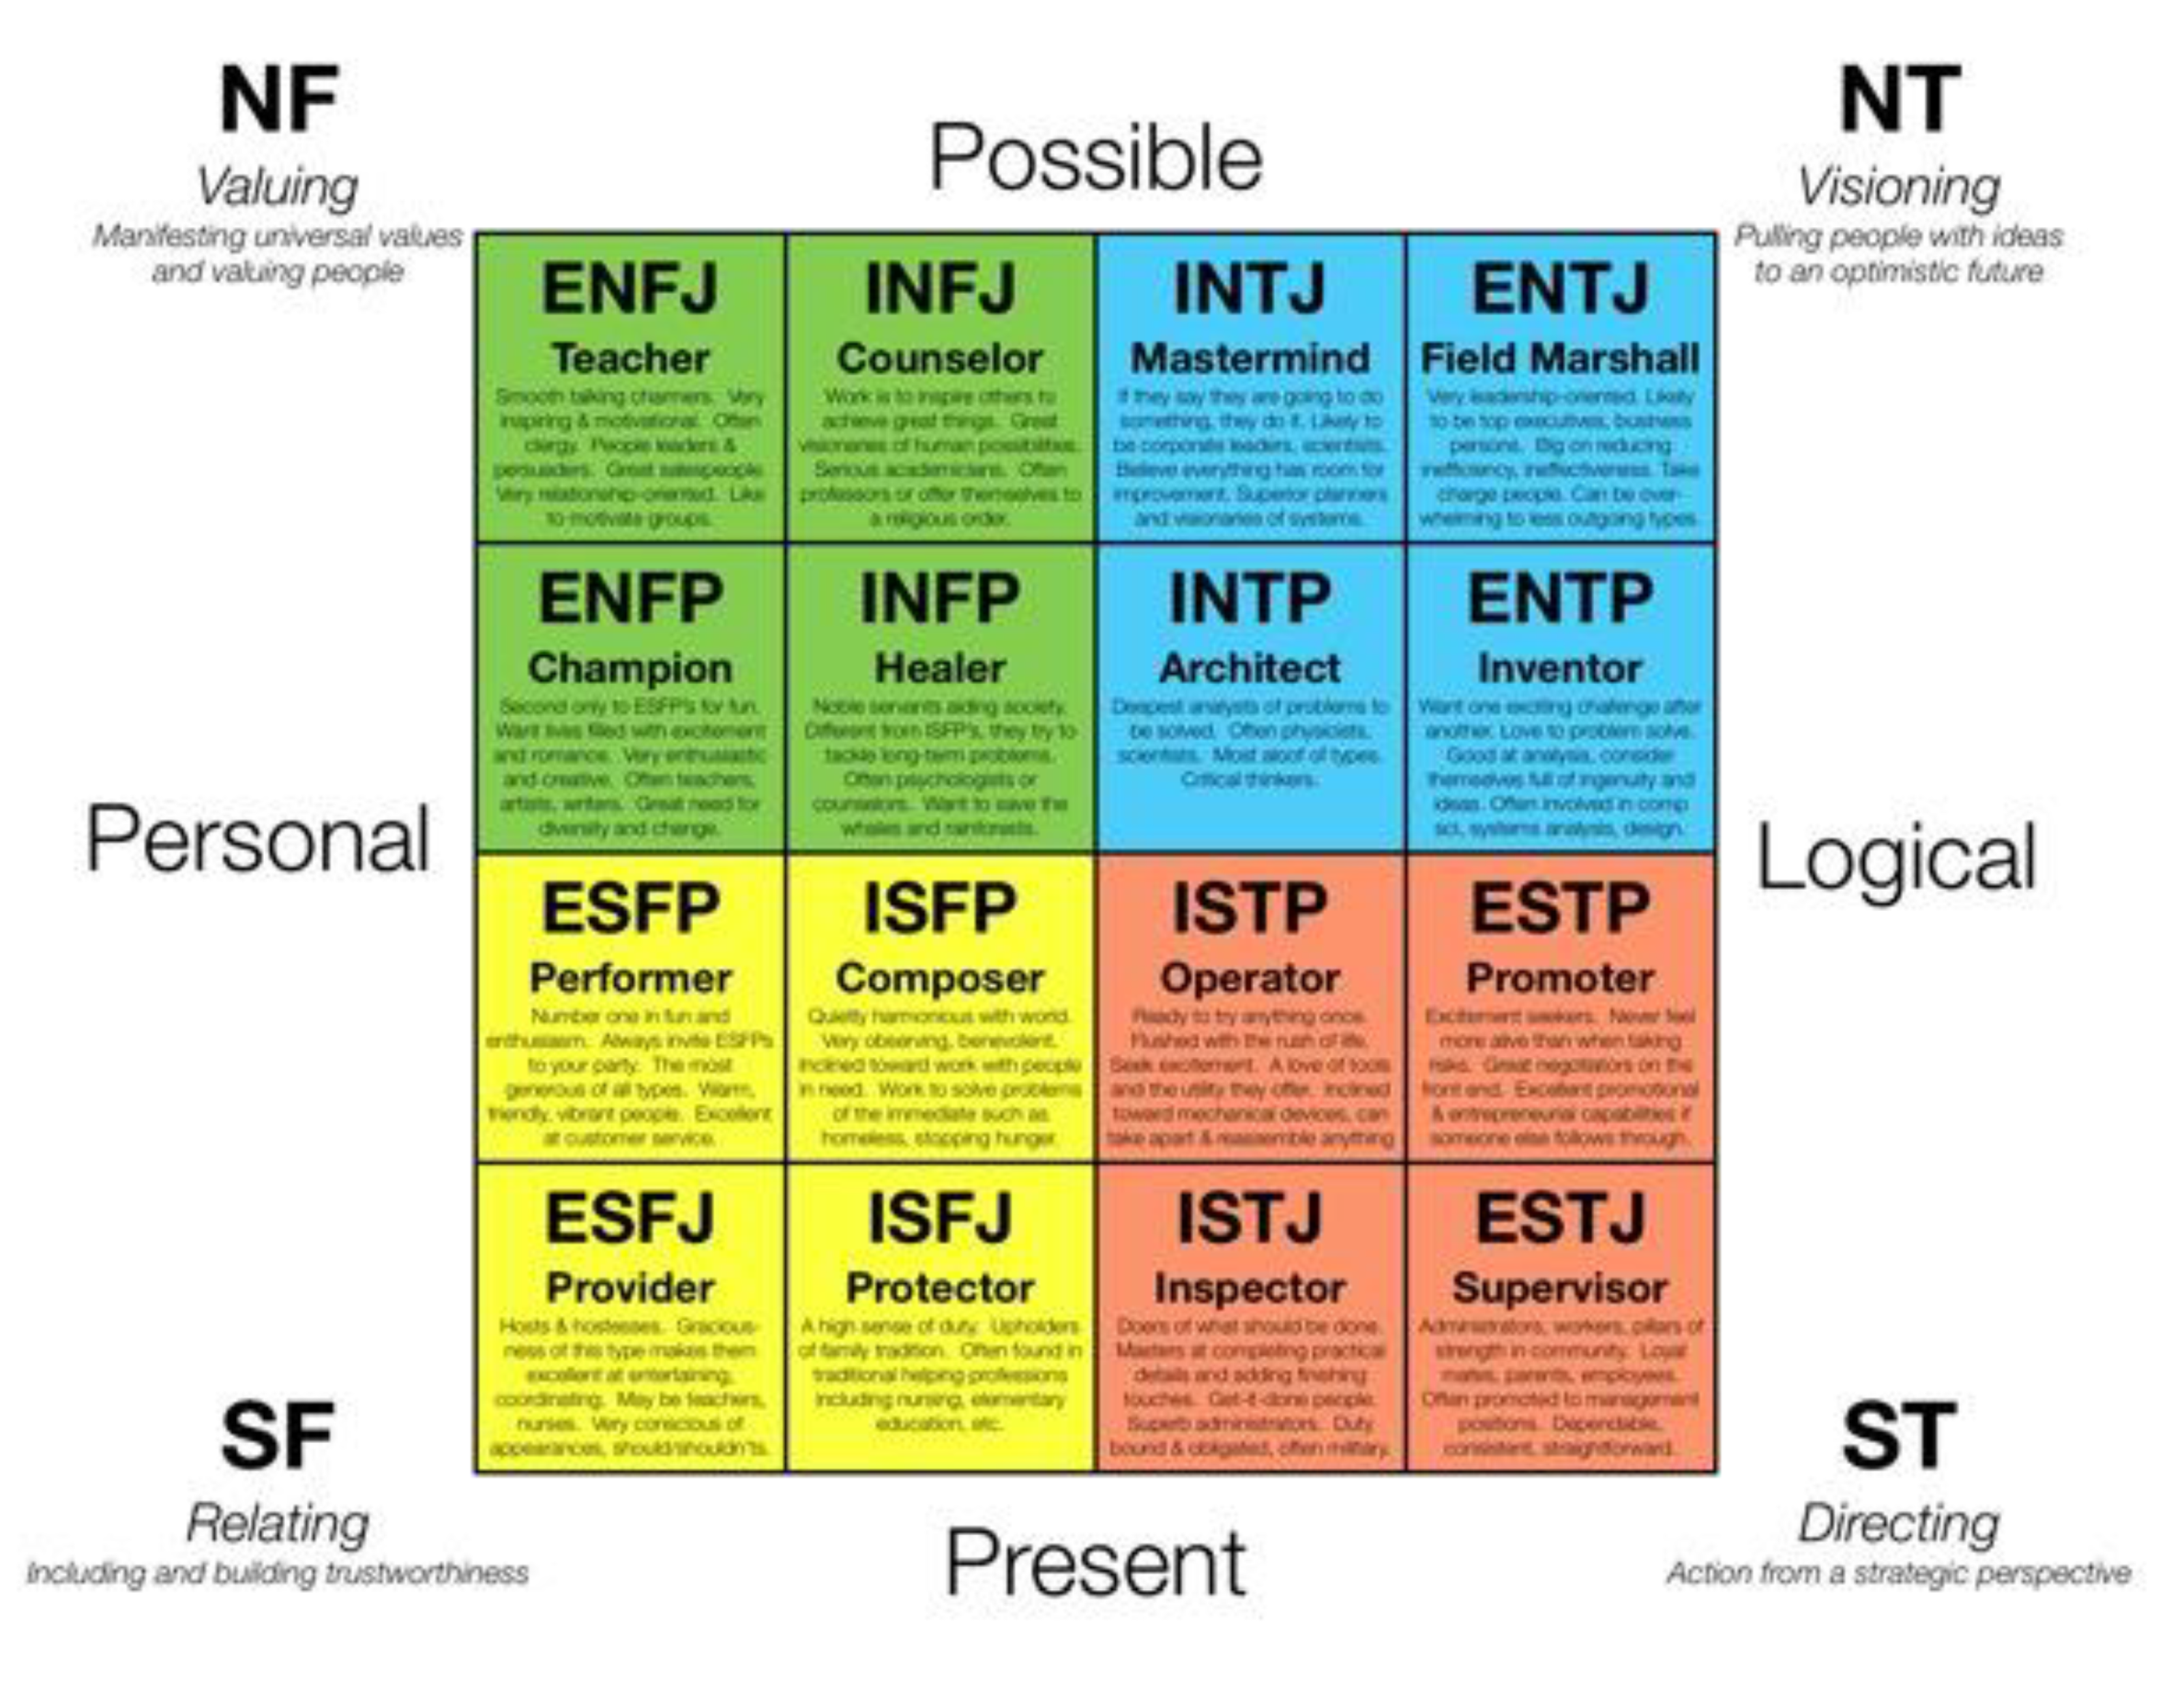 Predicting MBTI Personality type with K-means Clustering and